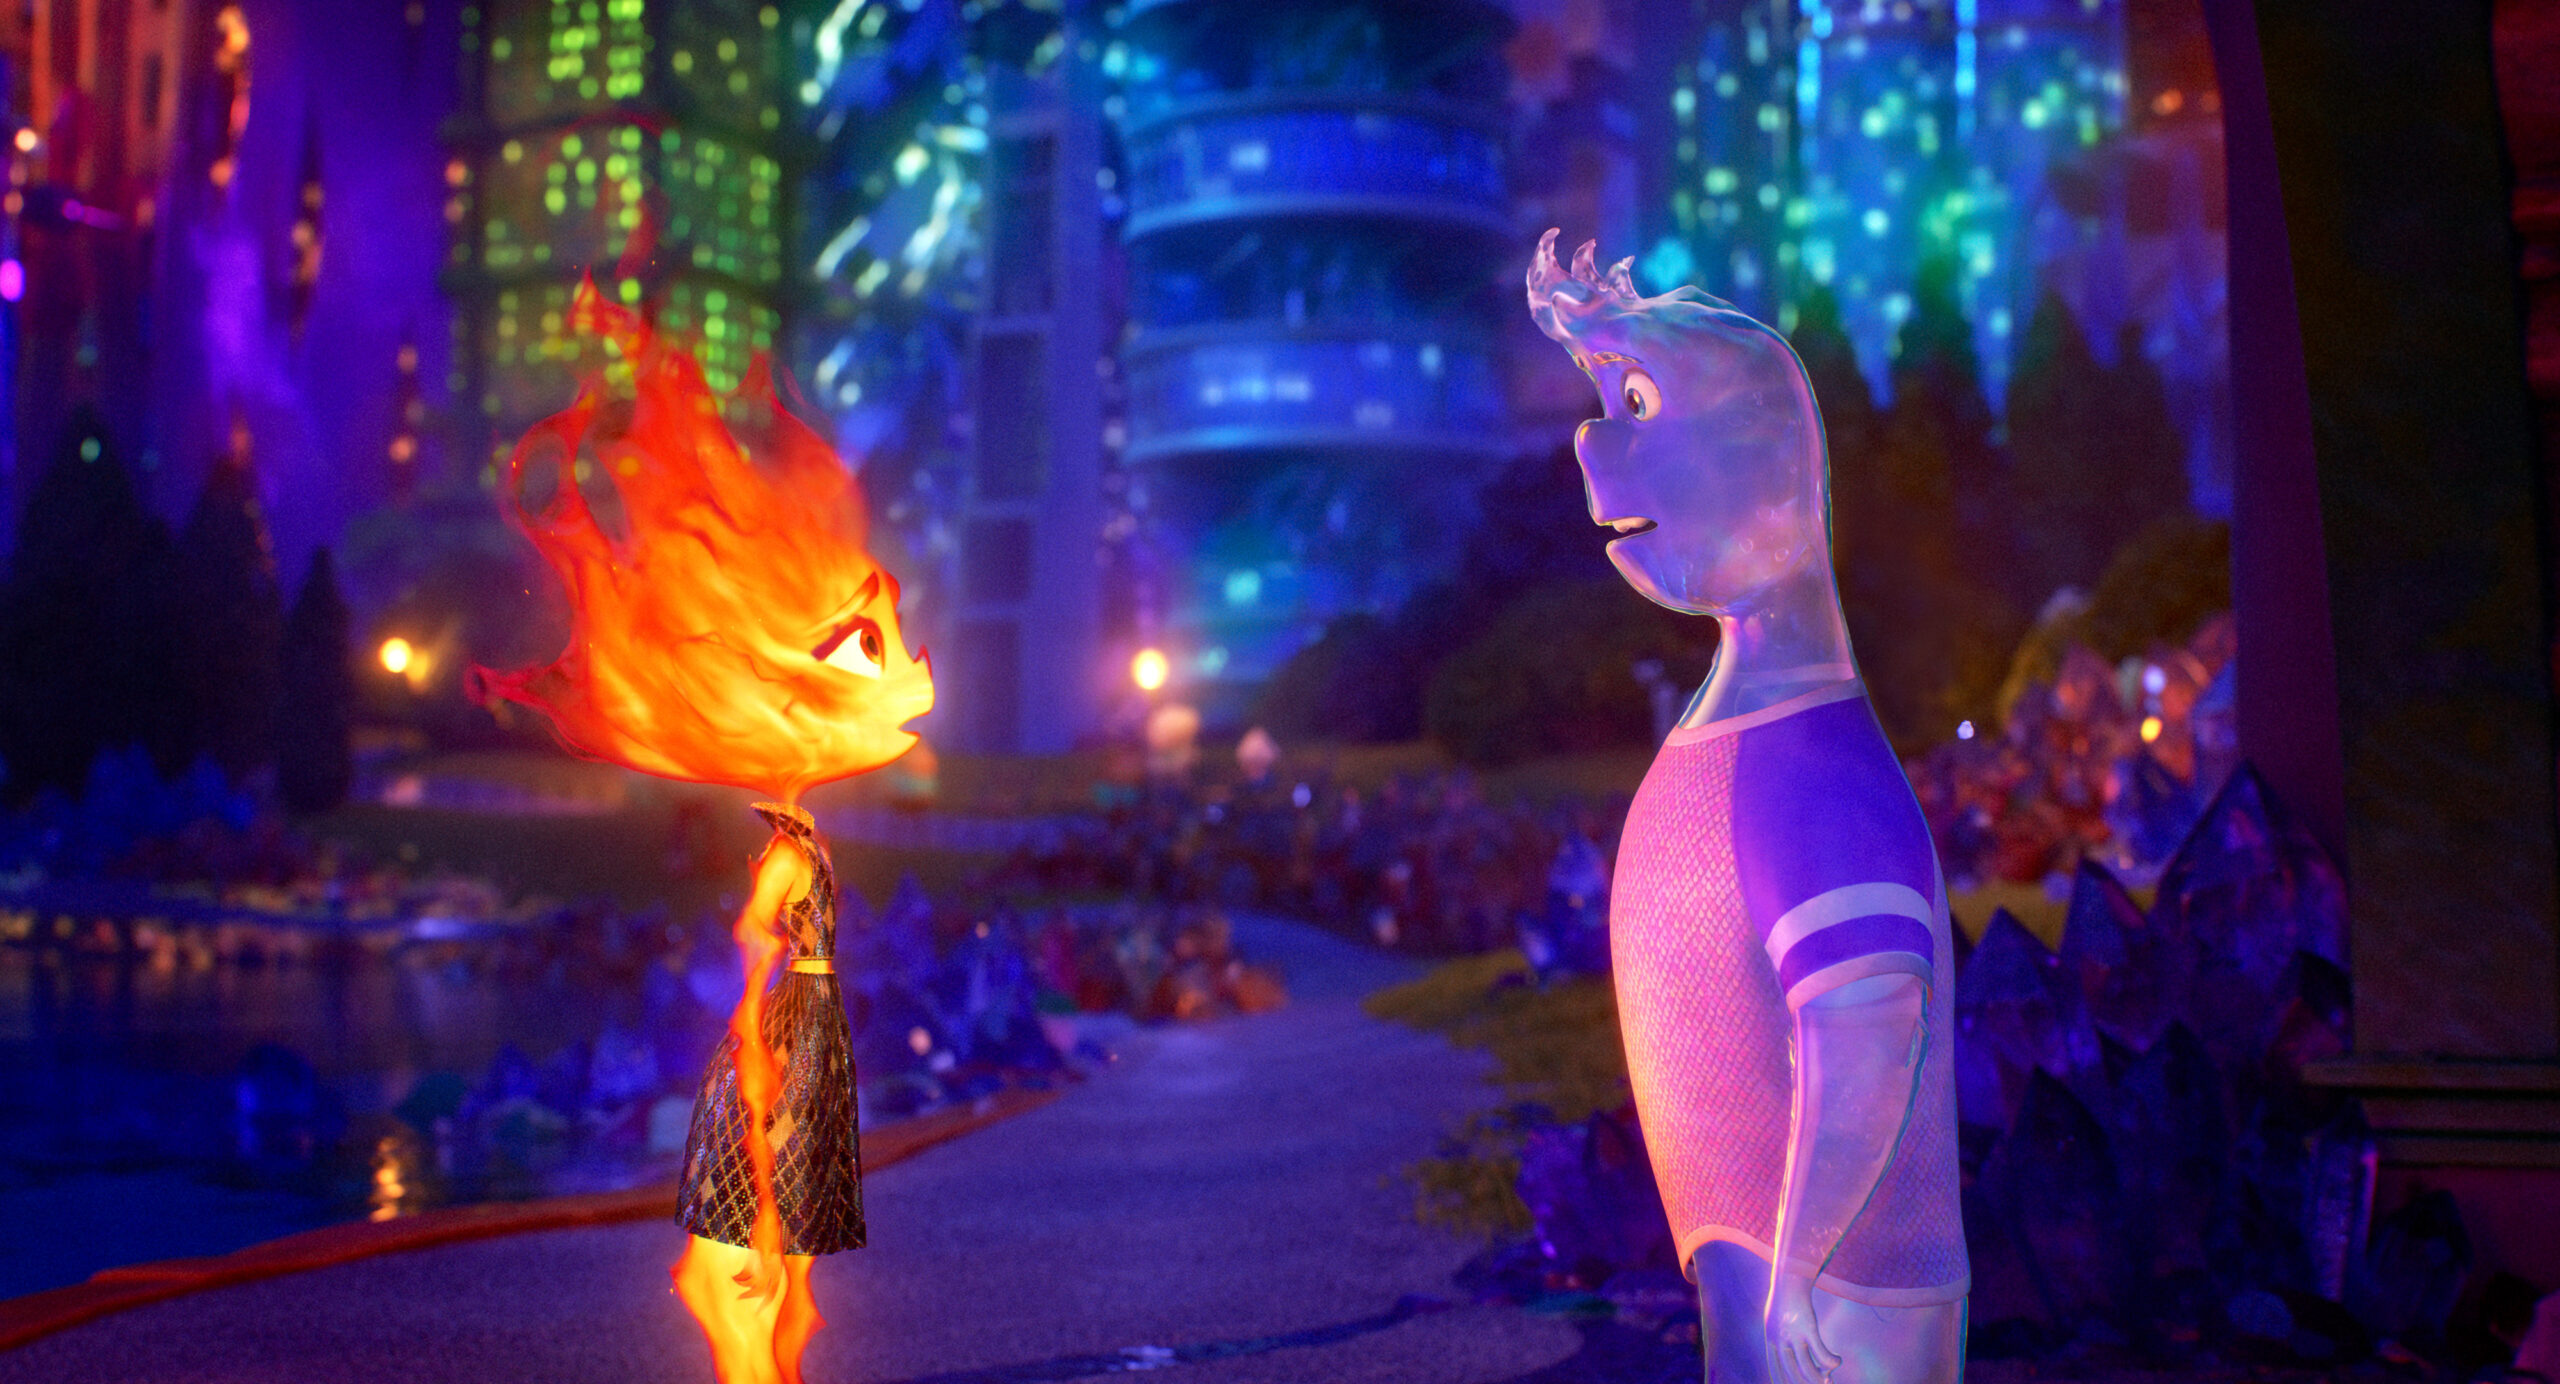 "Elemental" Is the Most Viewed Movie Premiere on Disney+ of 2023